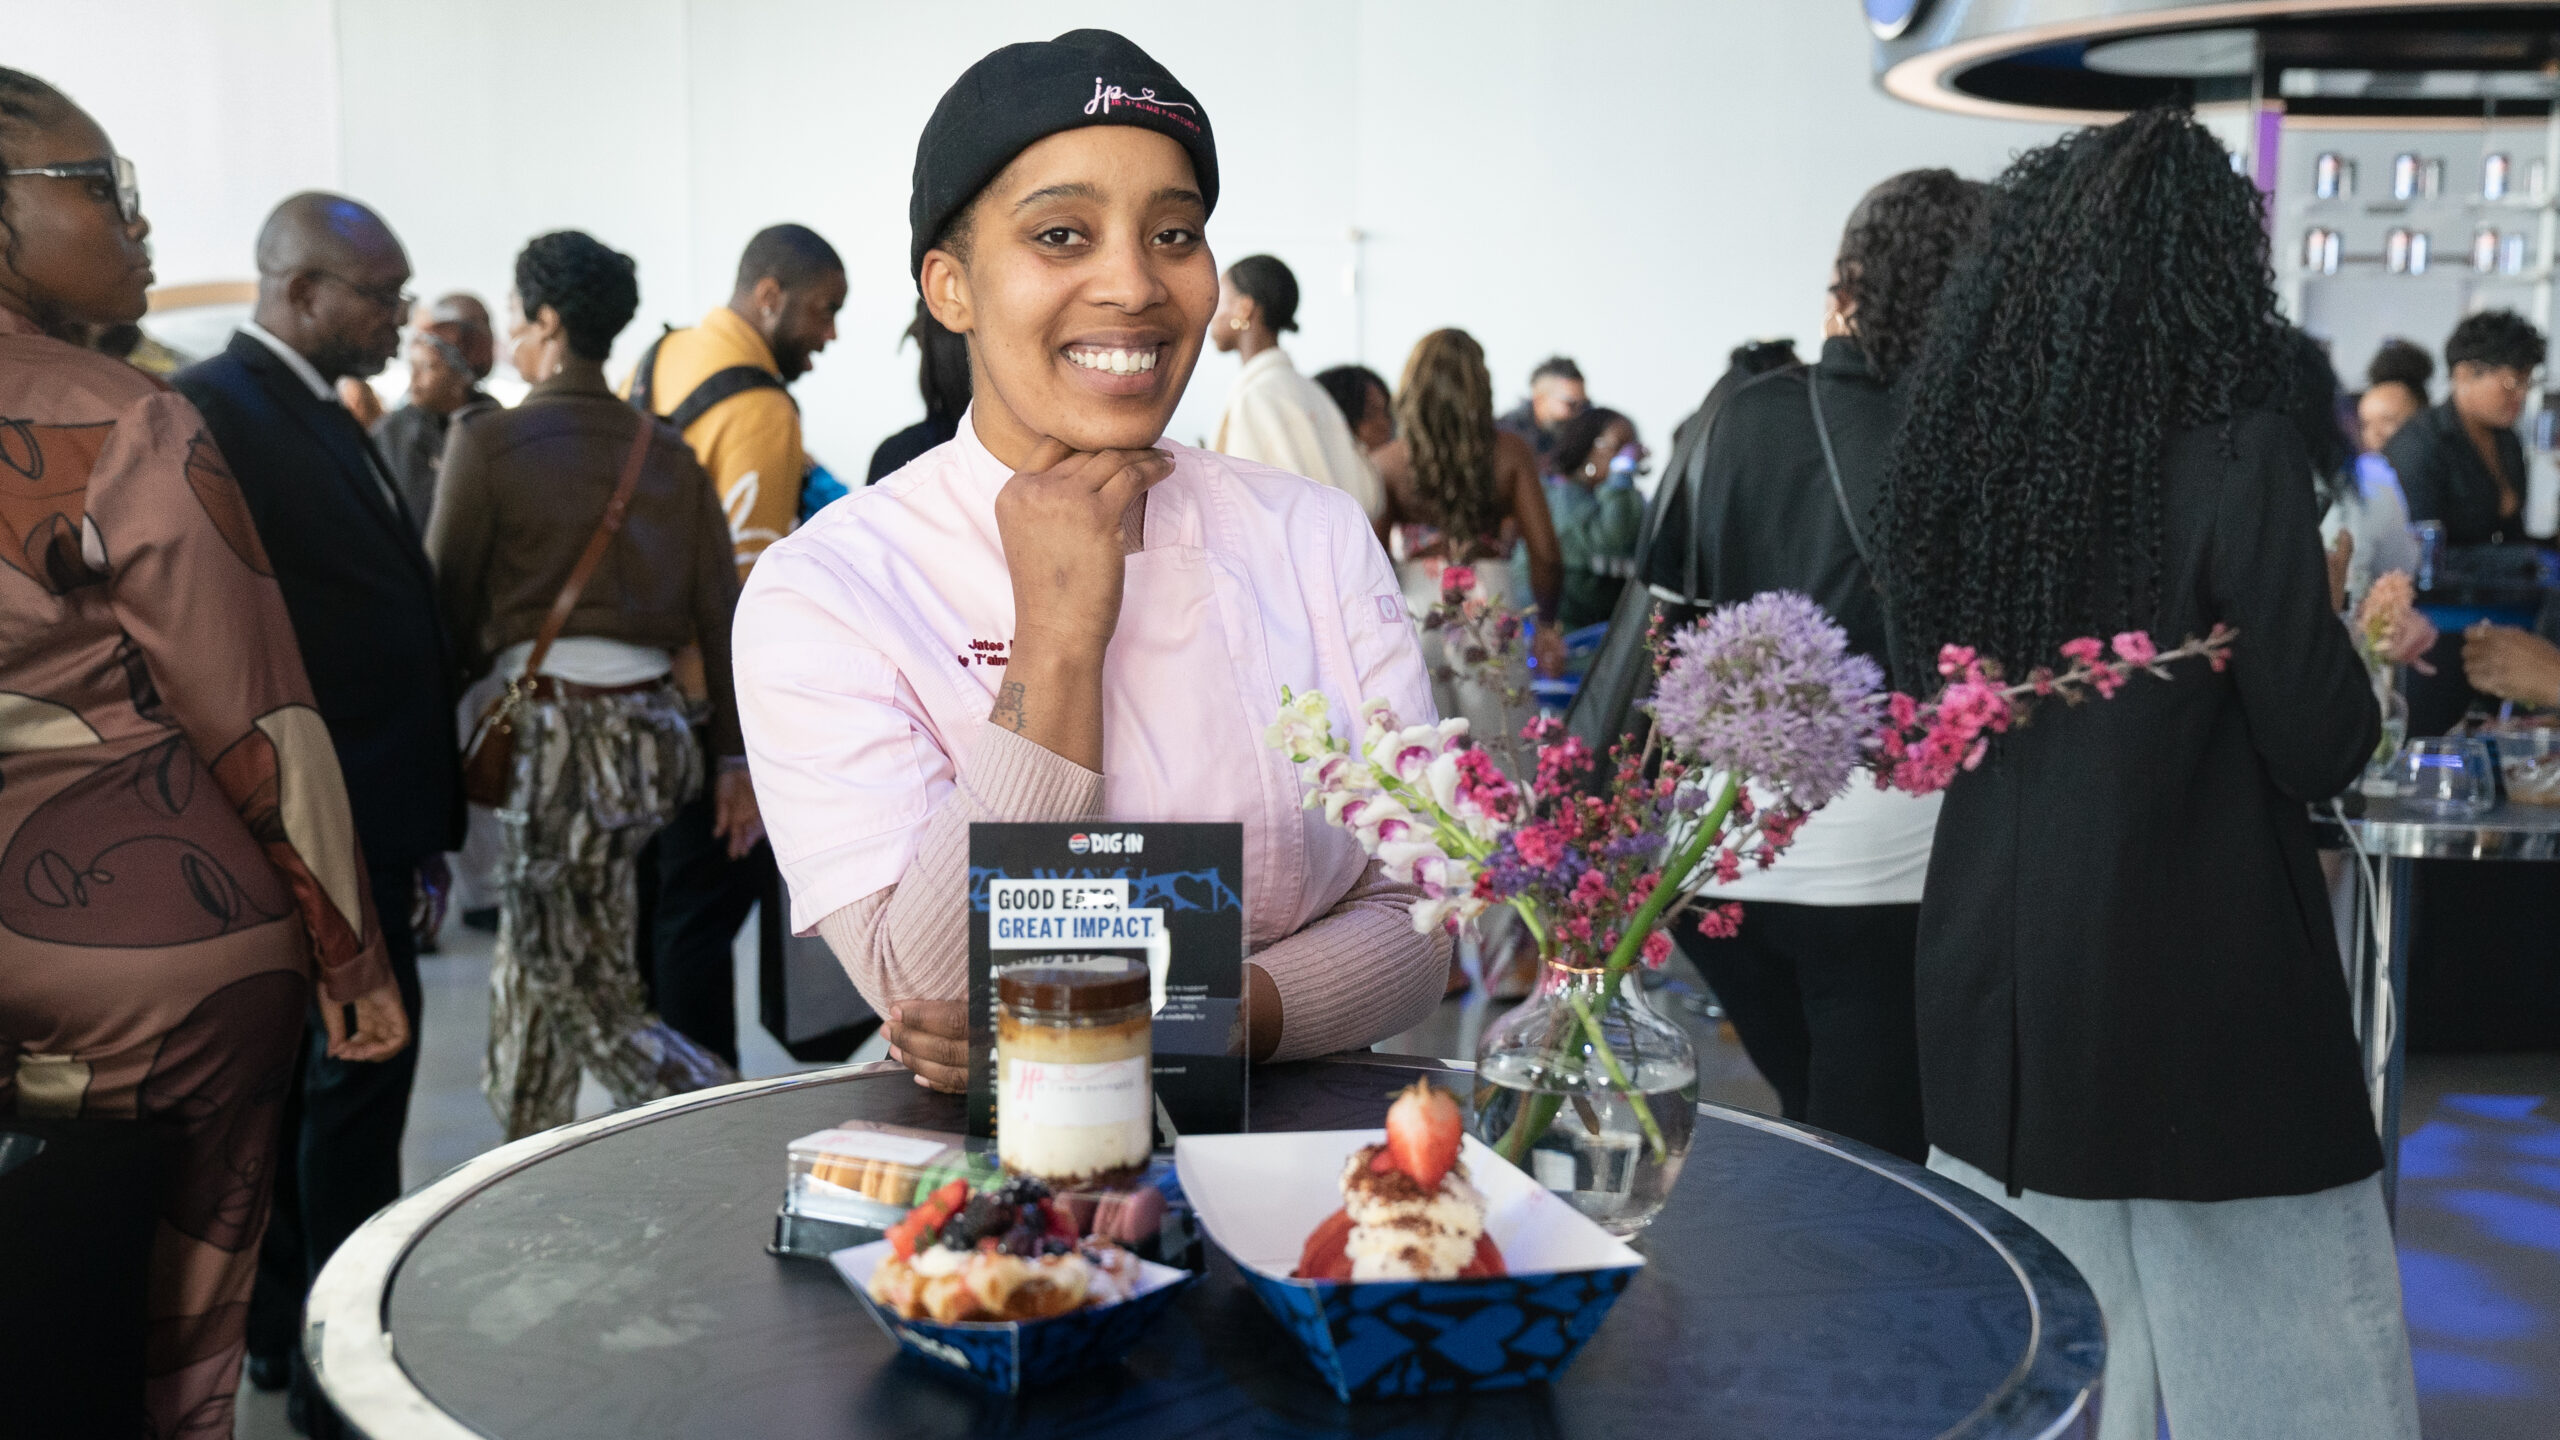 Jatee Kearsley Made 'Elevated Foods' Accessible To Her Community By Opening A Pastry Shop That Also Allows Customers To Pay With EBT Cards